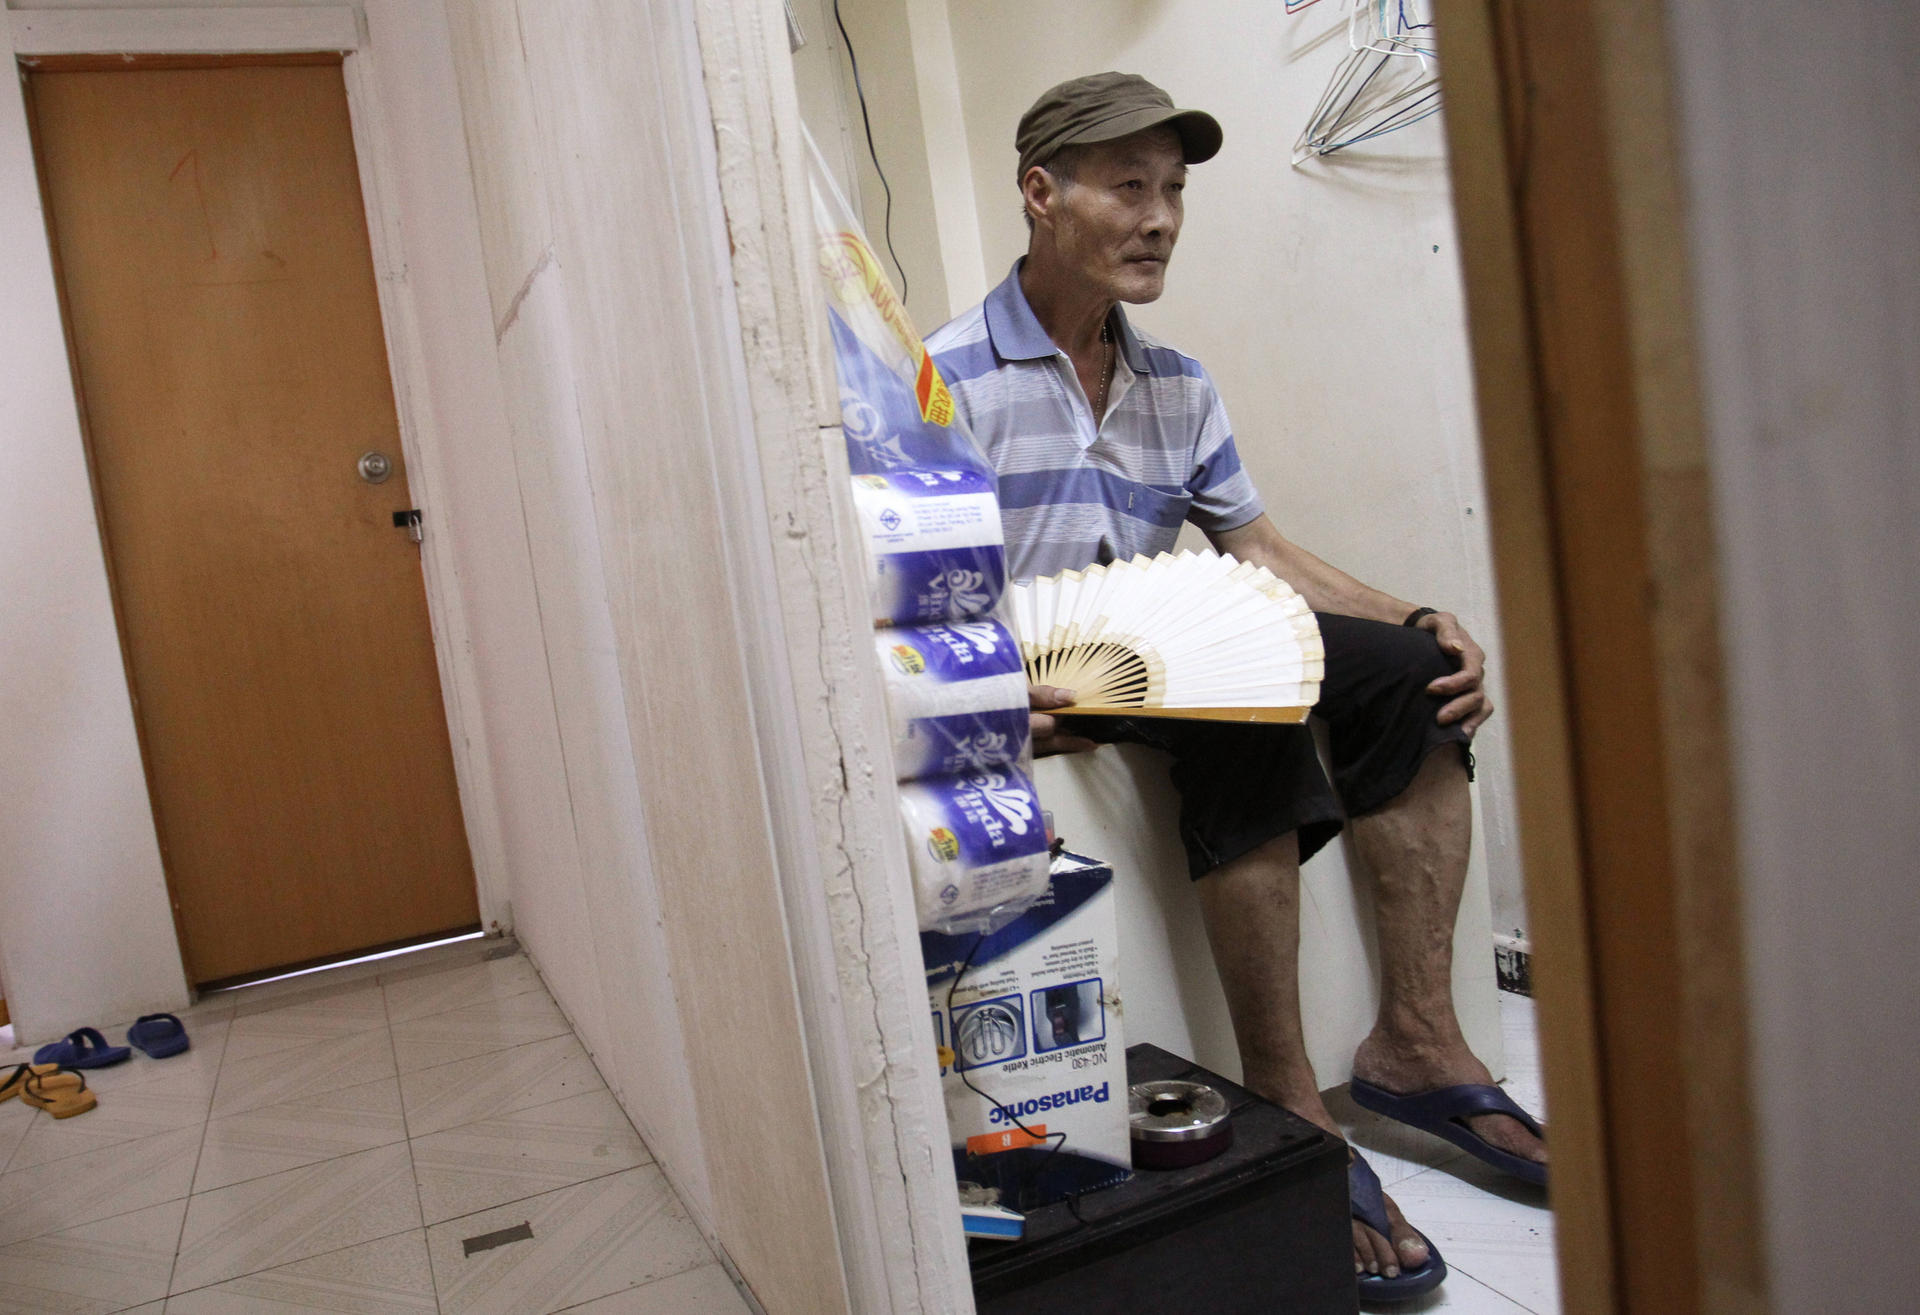 Welfare recipient Yeung Suan says the government should increase subsidies. Photo: Dickson Lee